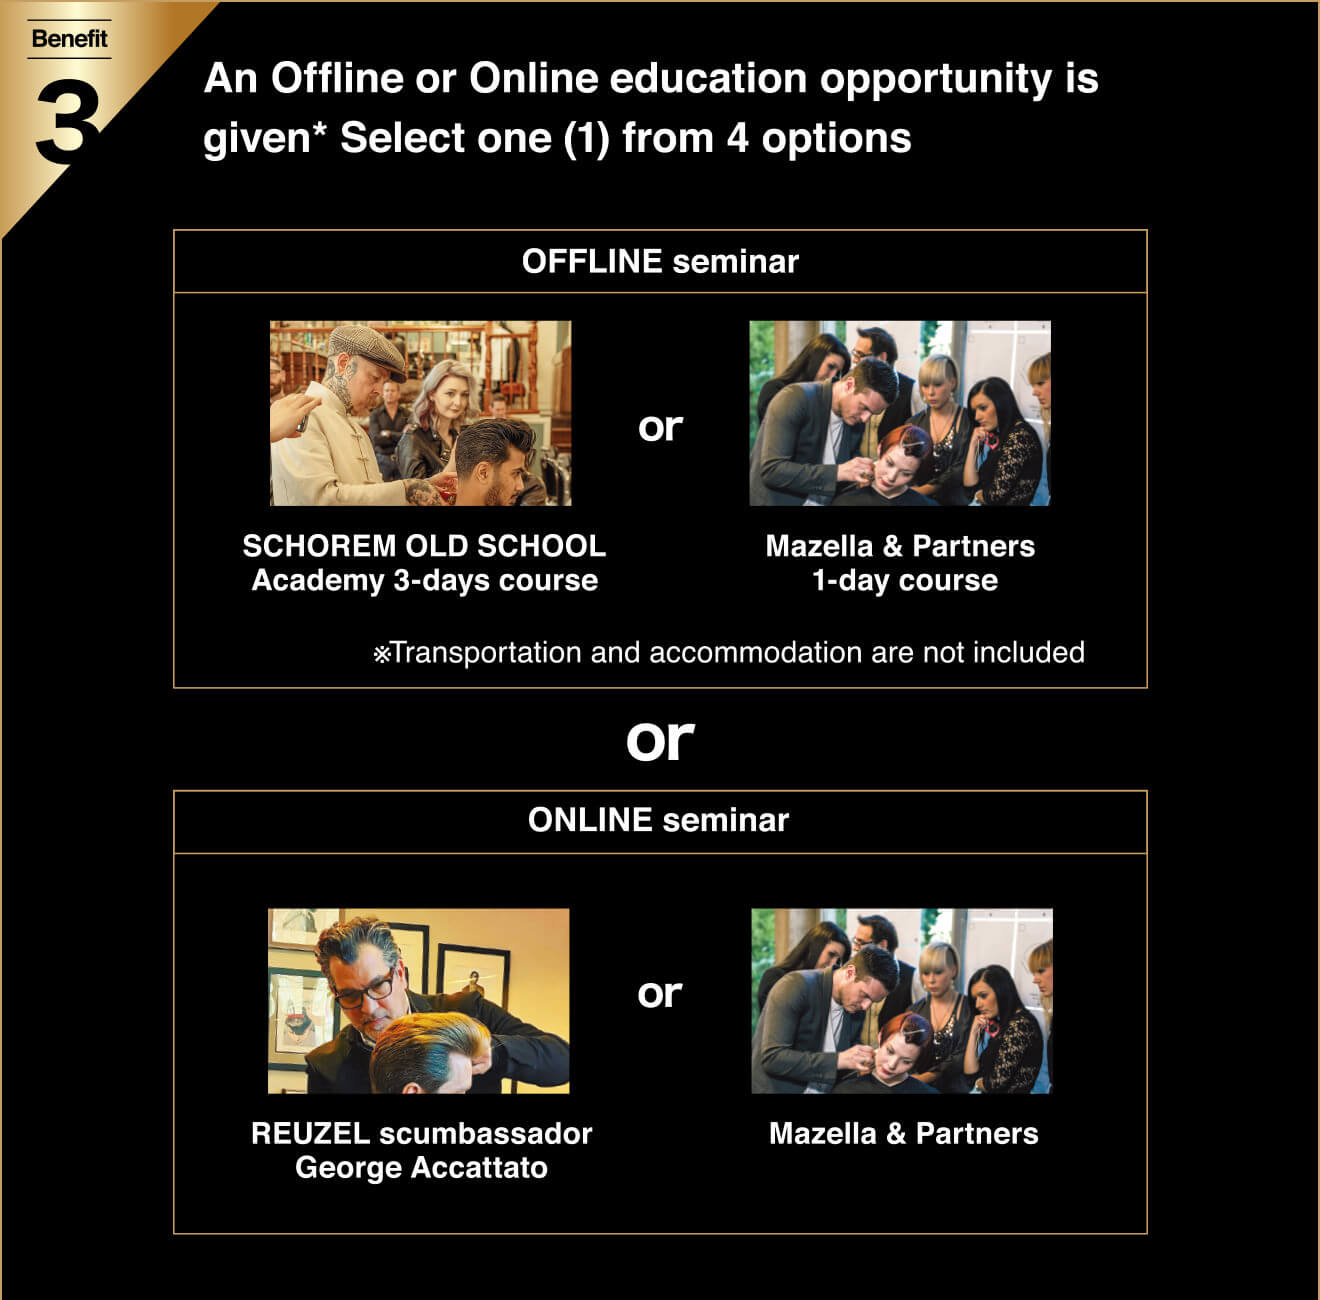 Benefit 3 An Offline or Online education opportunity is given * Select one (1) from 4 options